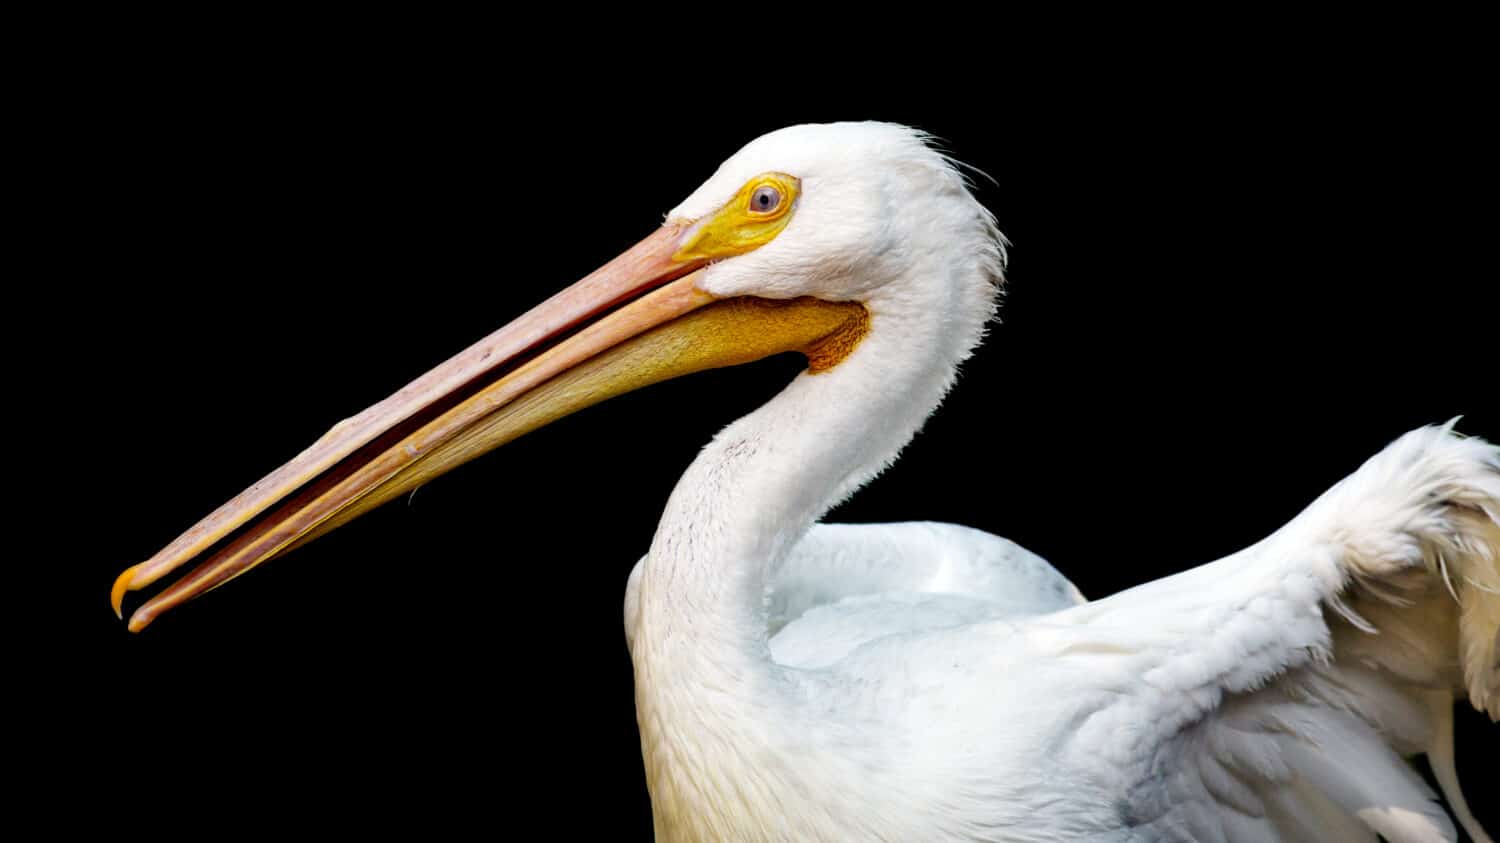 Portrait of a American white pelican against a black background